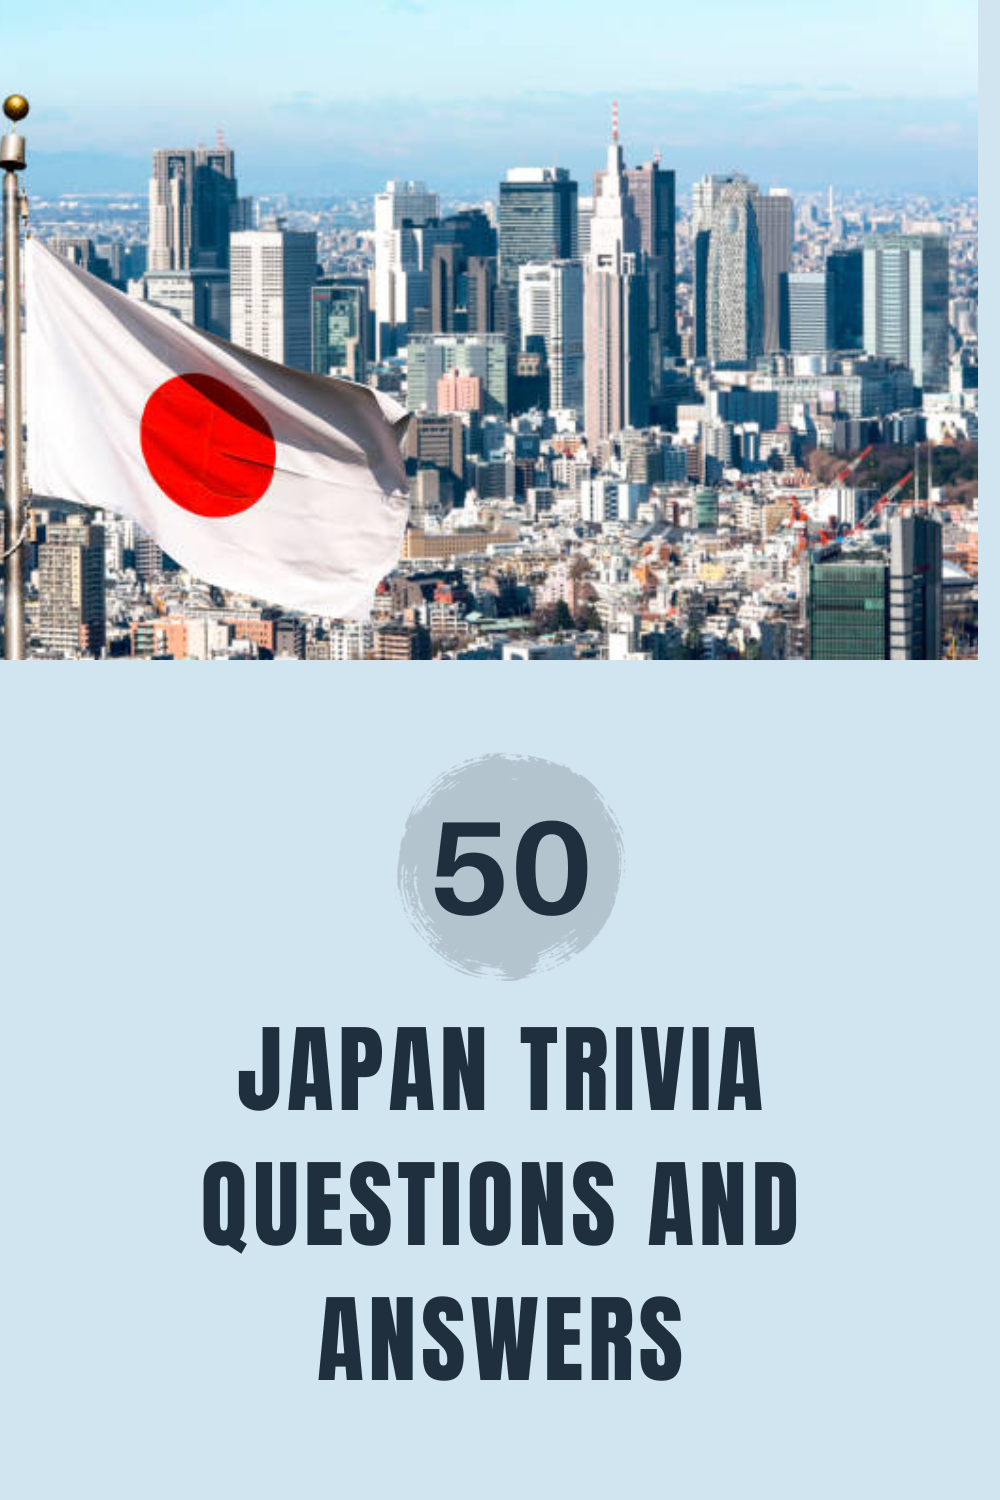 50 Japan Trivia Questions and Answers